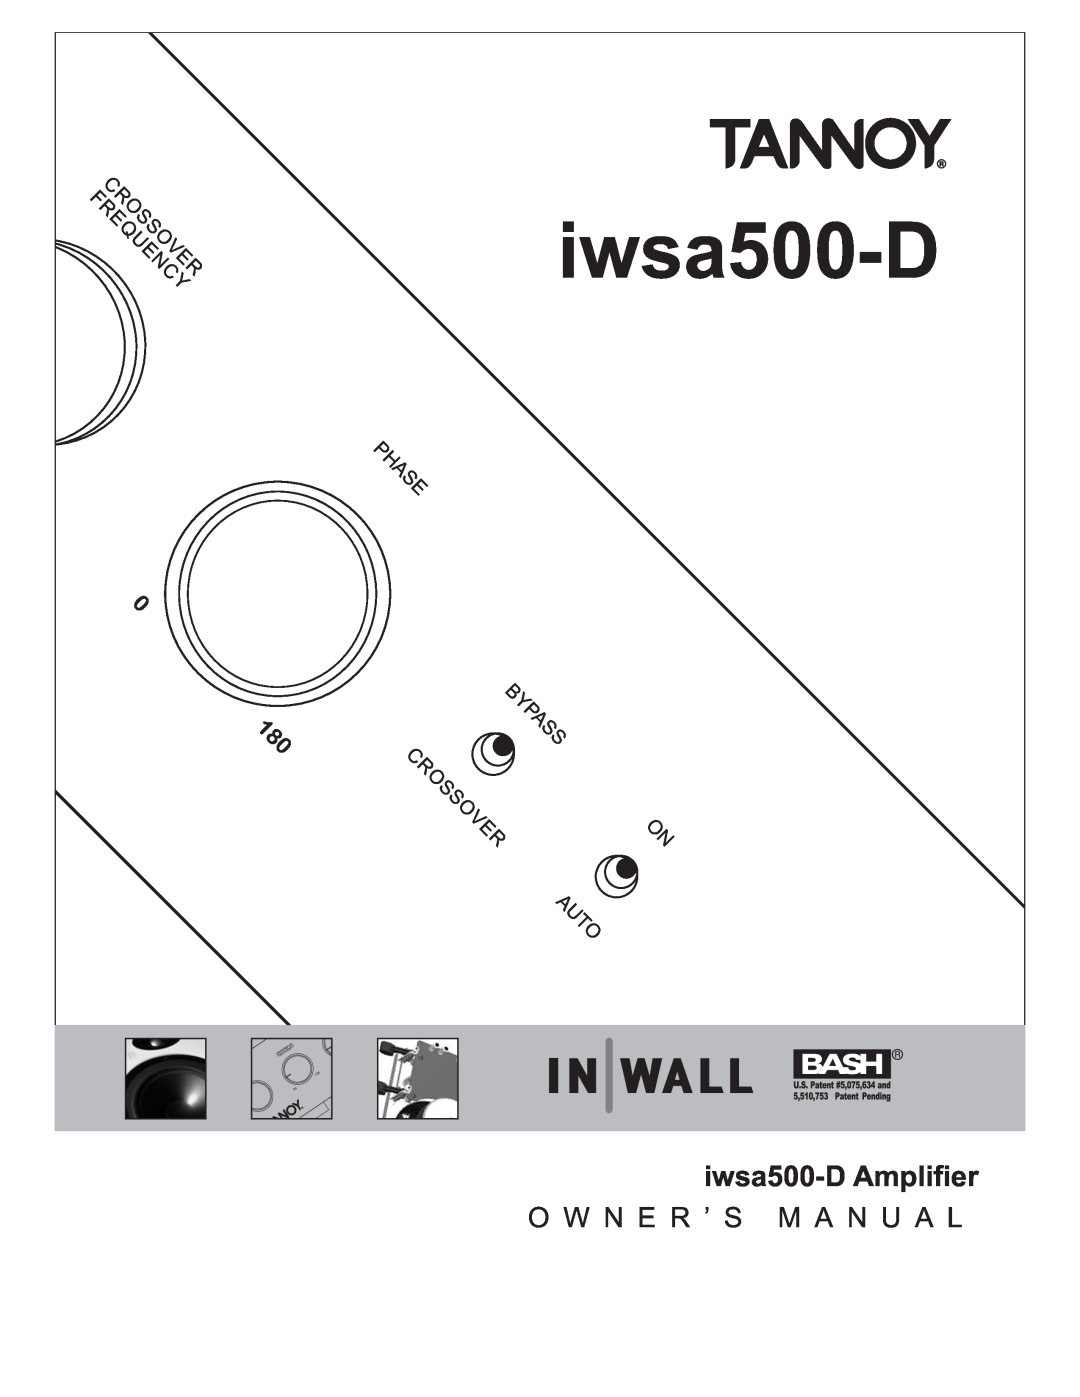 TOA Electronics IWSA500-D owner manual iwsa500-D Amplifier, Frequencycrossover, Phase, Bypass, Crossover, Auto, Sovnc 